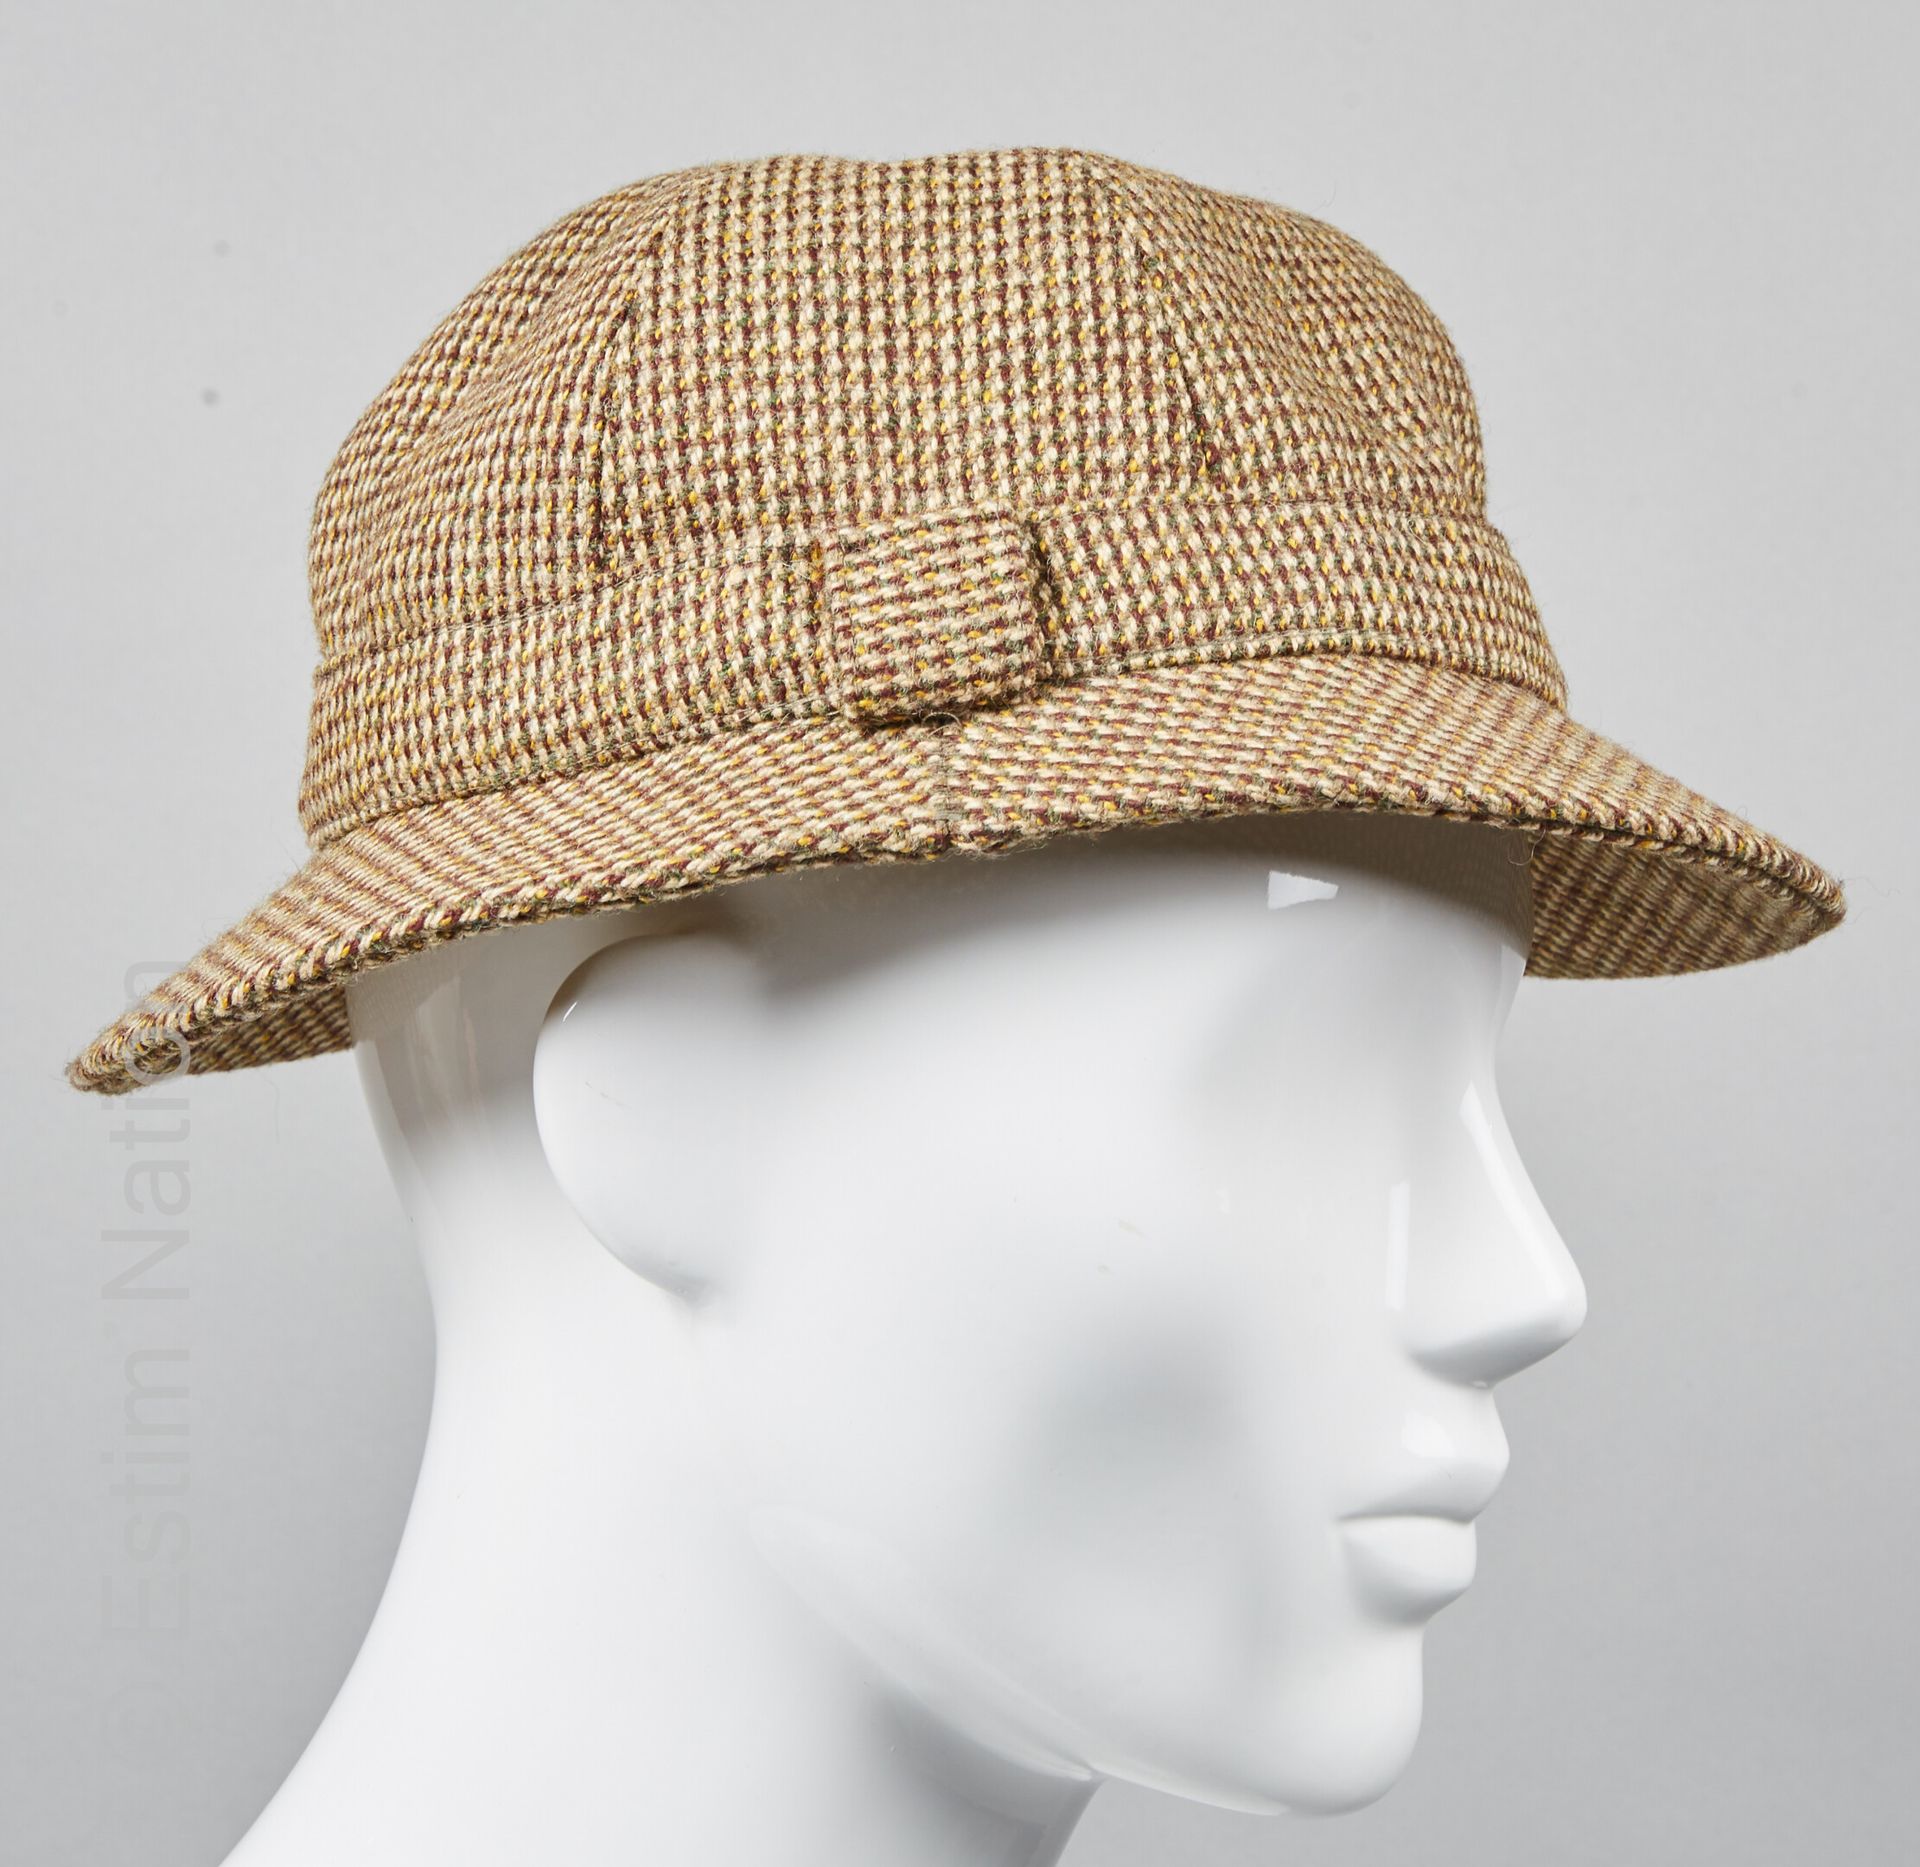 HOLLAND AND HOLLAND LONDON Safari hunting hat in tweed in autumnal tones